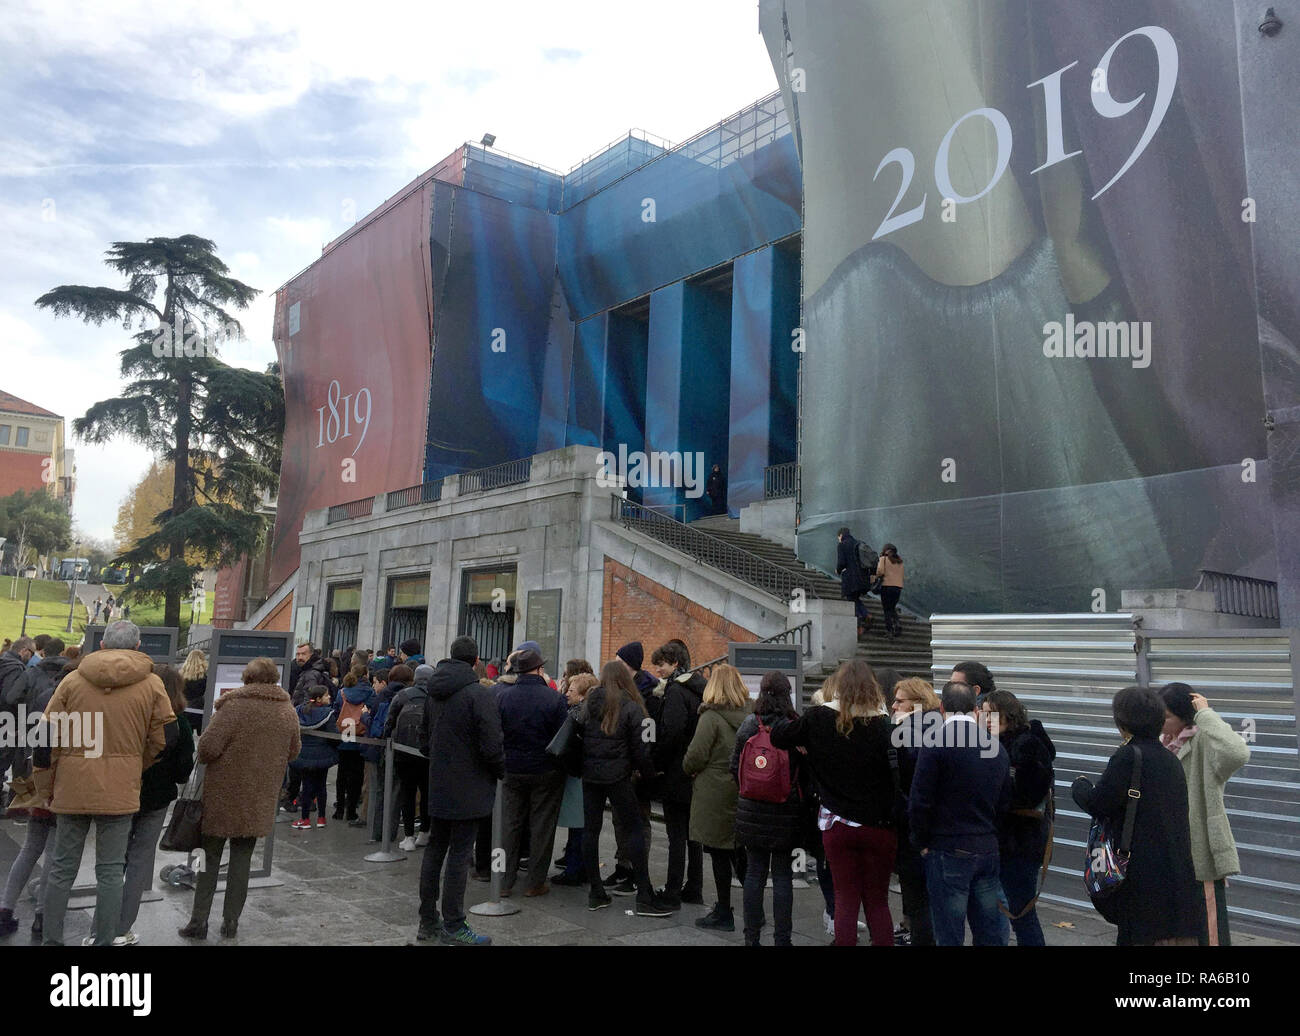 Madrid, Spain. 08th Dec, 2018. A queue of visitors in front of the Prado, on the front of which the dates of the anniversary are displayed: 1819 - 2019. The museum is a must during a visit to Madrid. The Prado is Spain's art temple par excellence. The museum celebrates its 200th anniversary in 2019. (to dpa 'Where the crème de la crème of art cavorts: The Prado will be 200' from 02.01.2018) Credit: Carola Frentzen/dpa/Alamy Live News Stock Photo